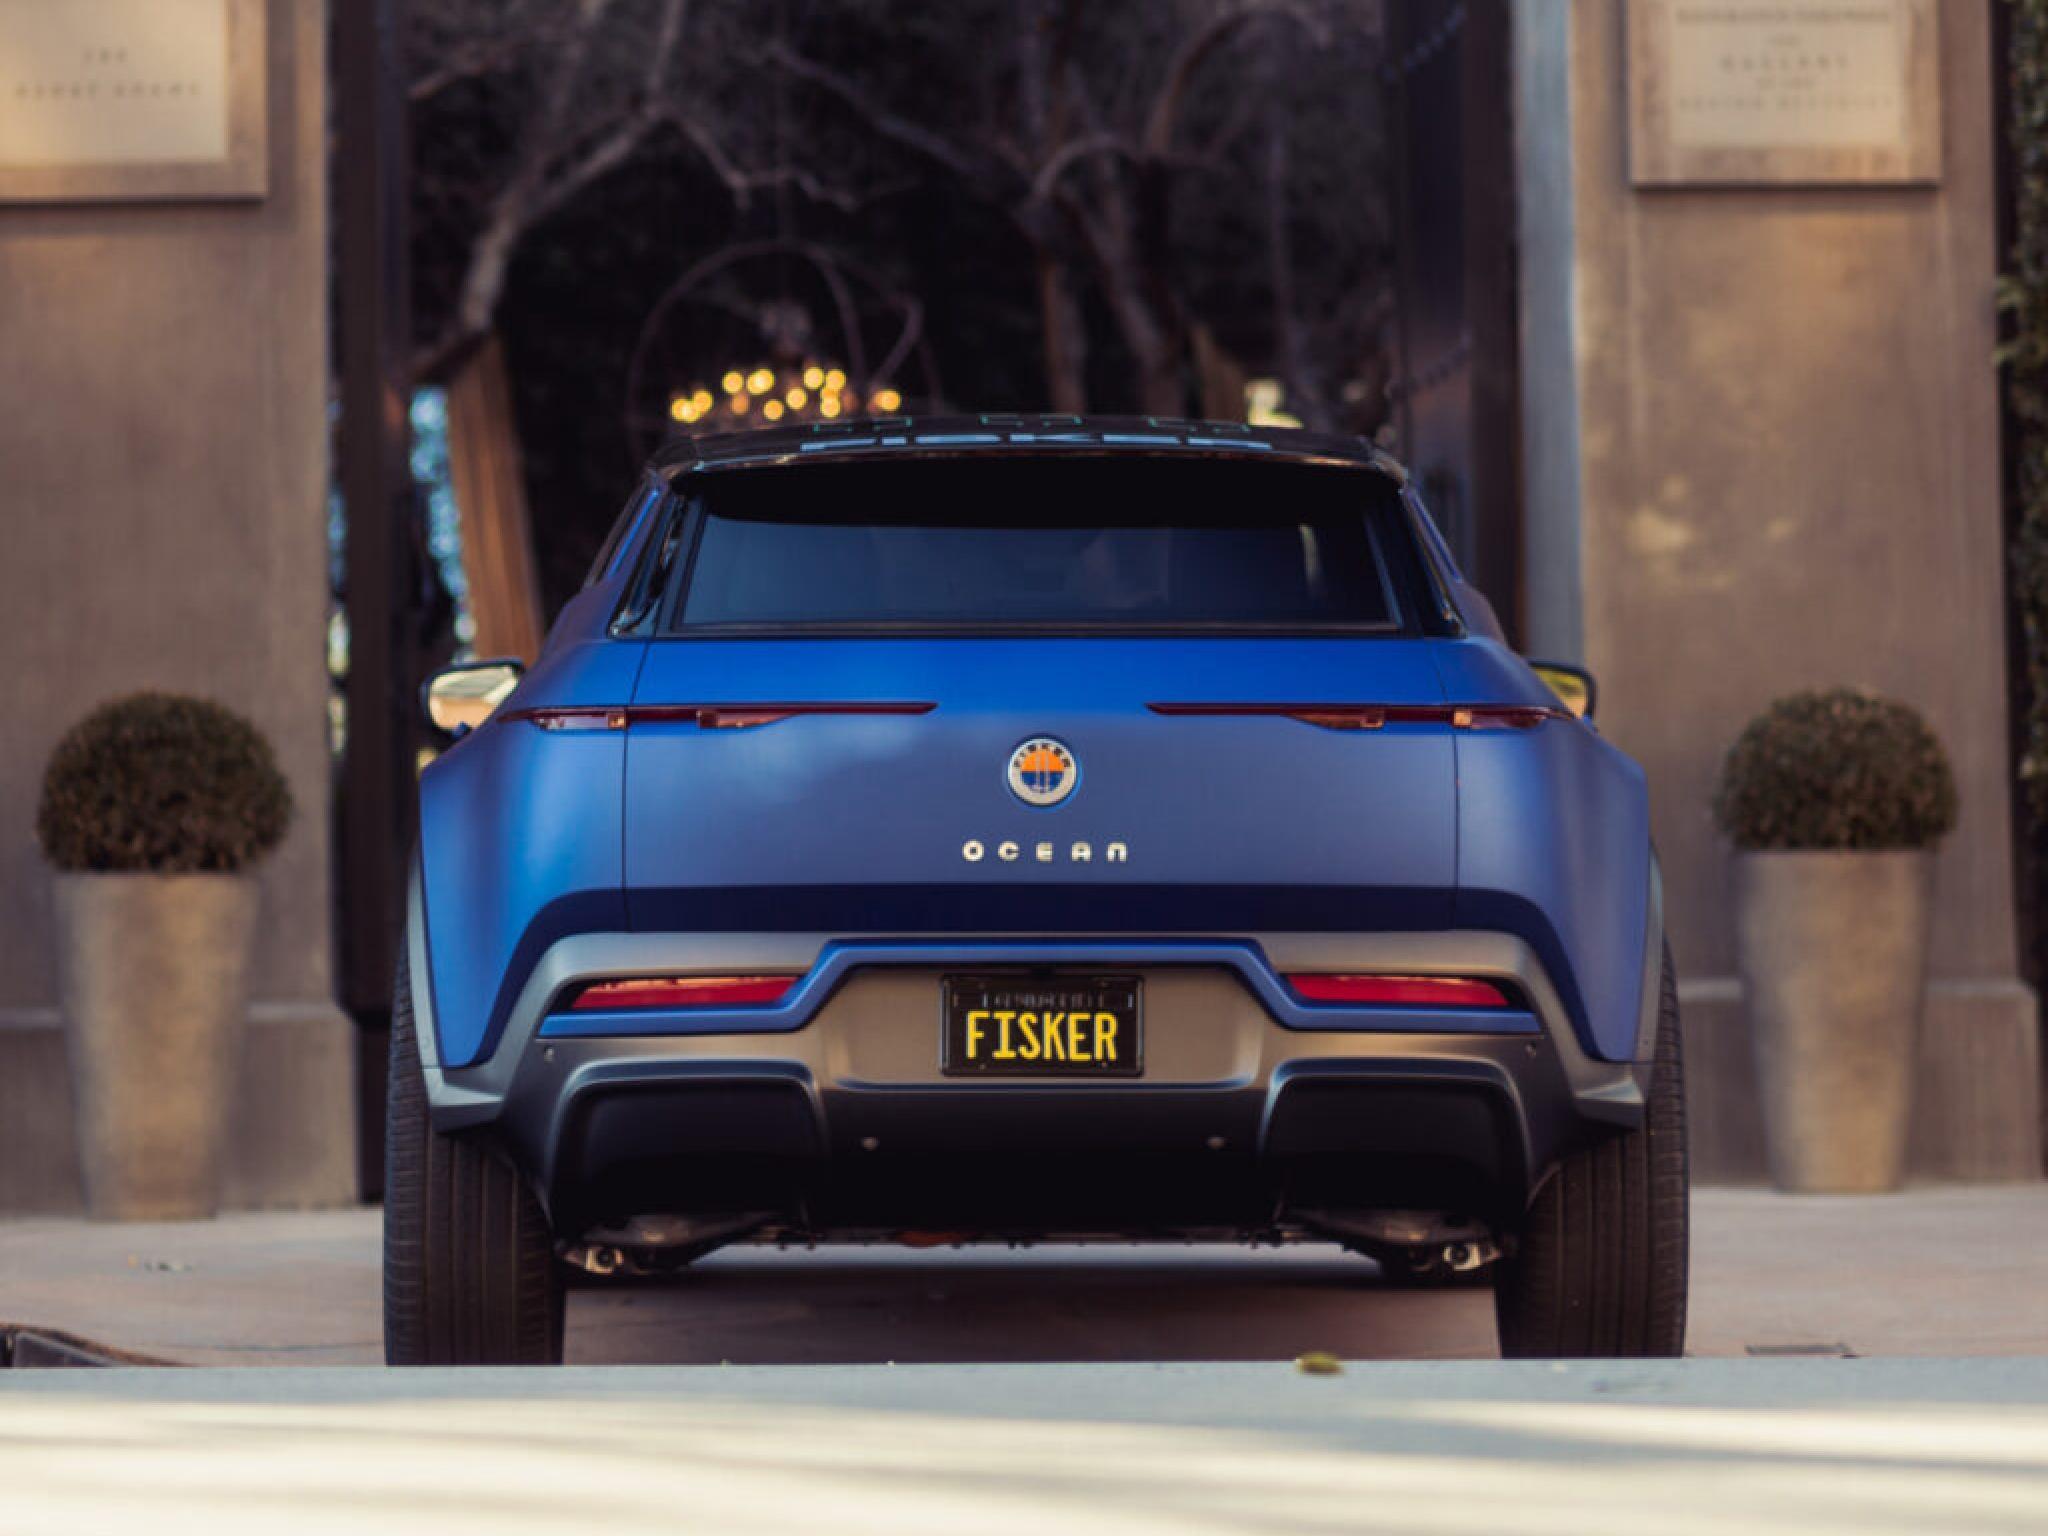  ev-maker-fisker-files-chapter-11-bankruptcy-protection-whats-going-on-with-the-stock 